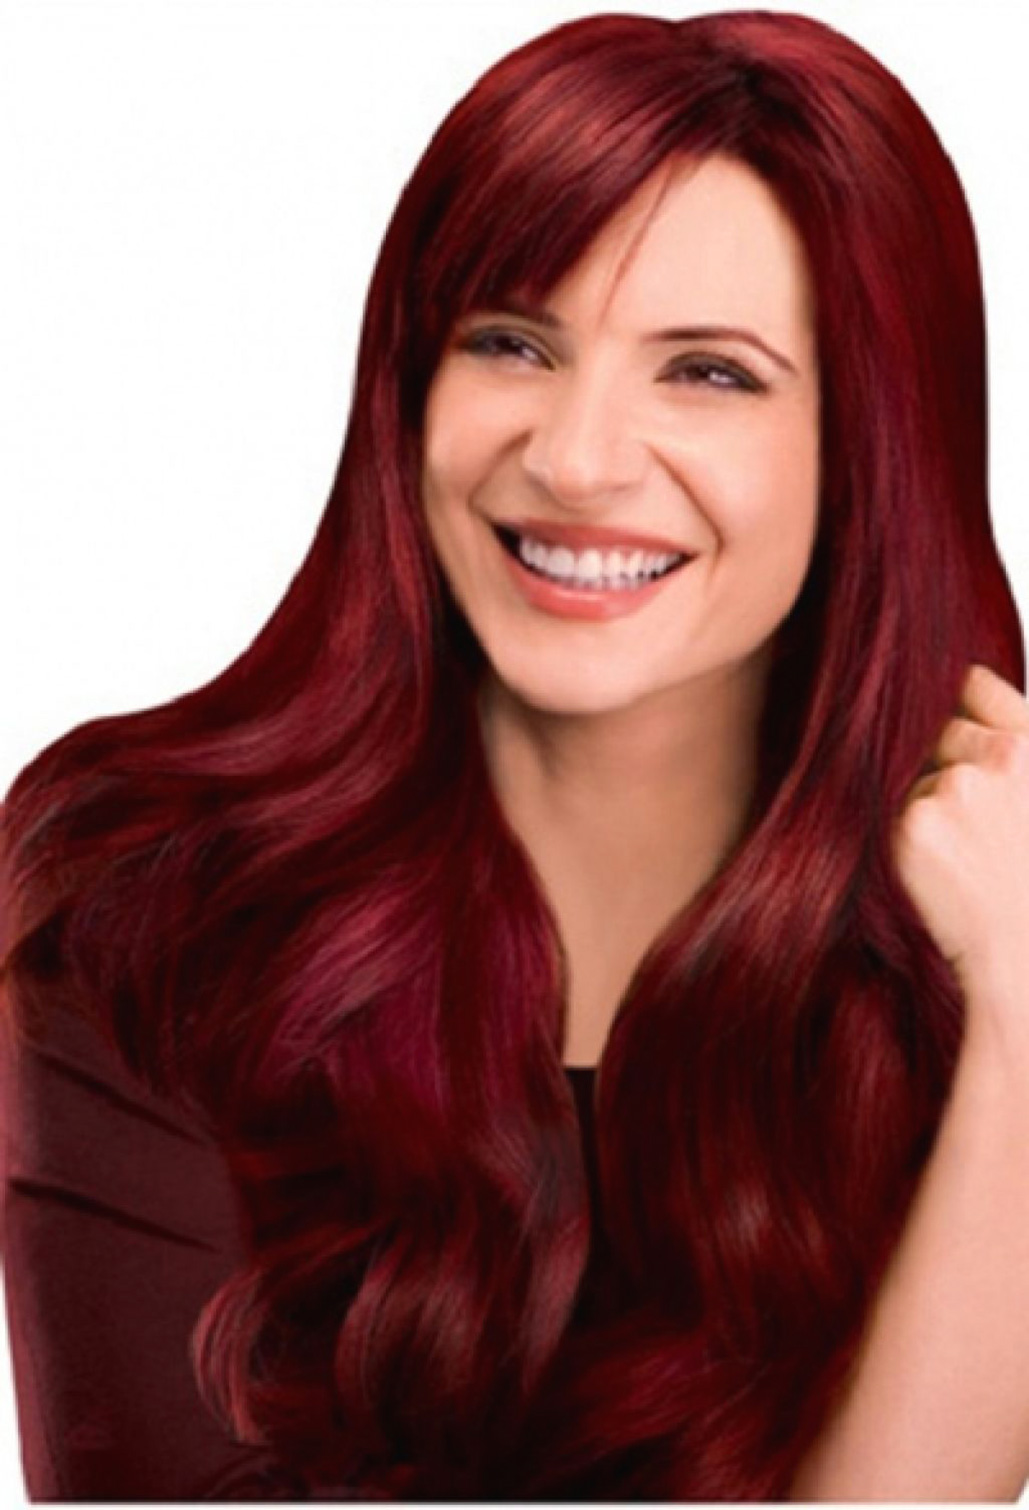 Auburn Hair Color Top Haircut Styles 2017 Coloring Wallpapers Download Free Images Wallpaper [coloring654.blogspot.com]